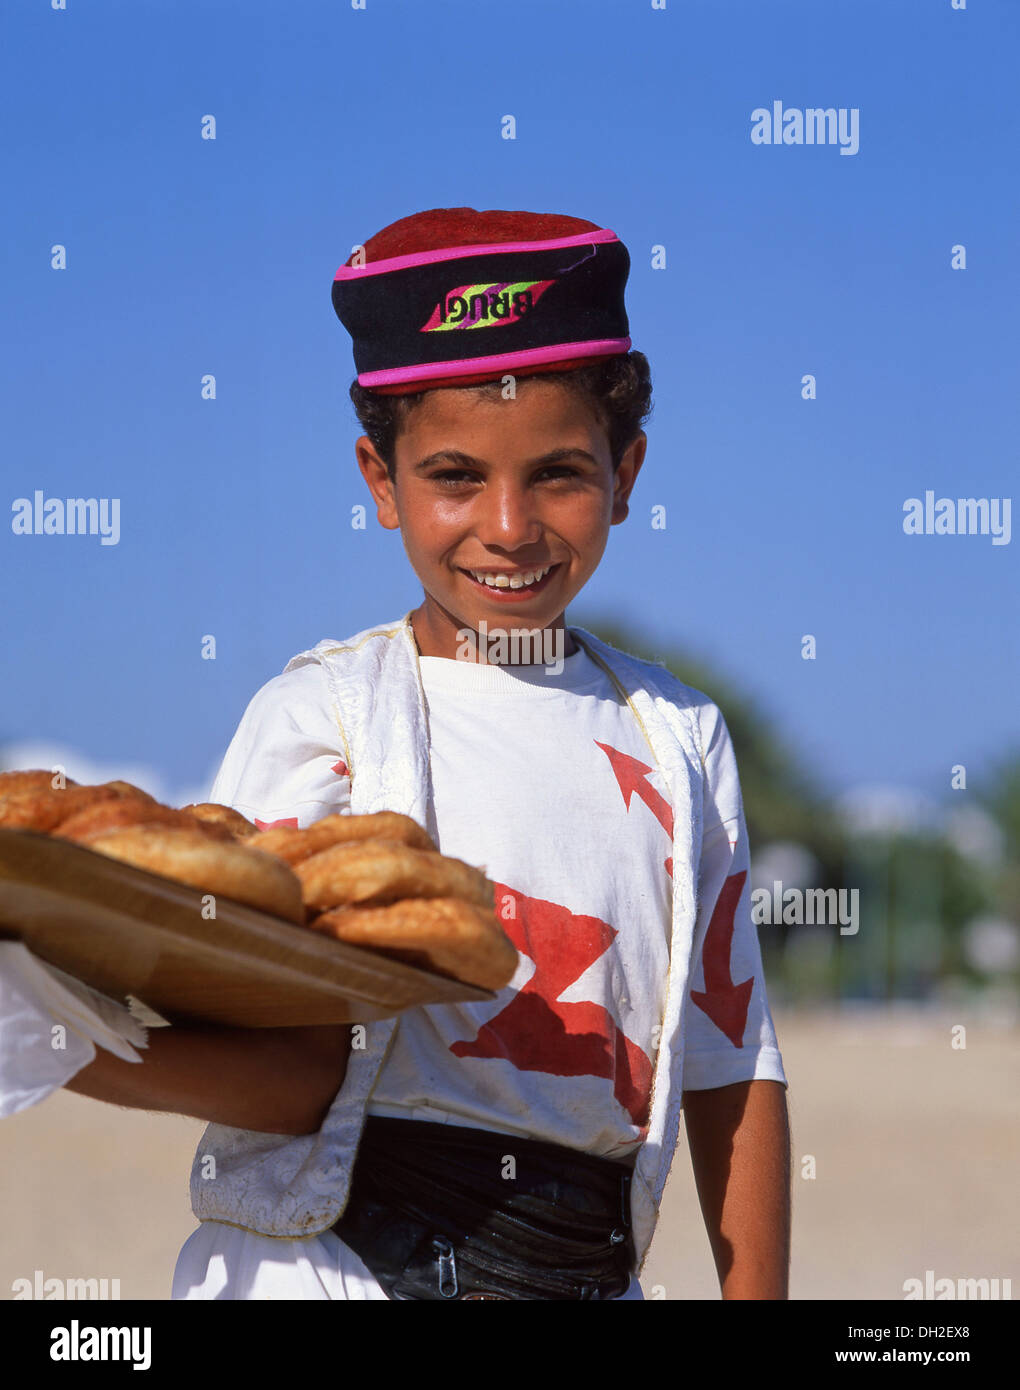 Young boy selling pastries on Sousse Beach, Sousse, Sousse Governorate, Tunisia Stock Photo